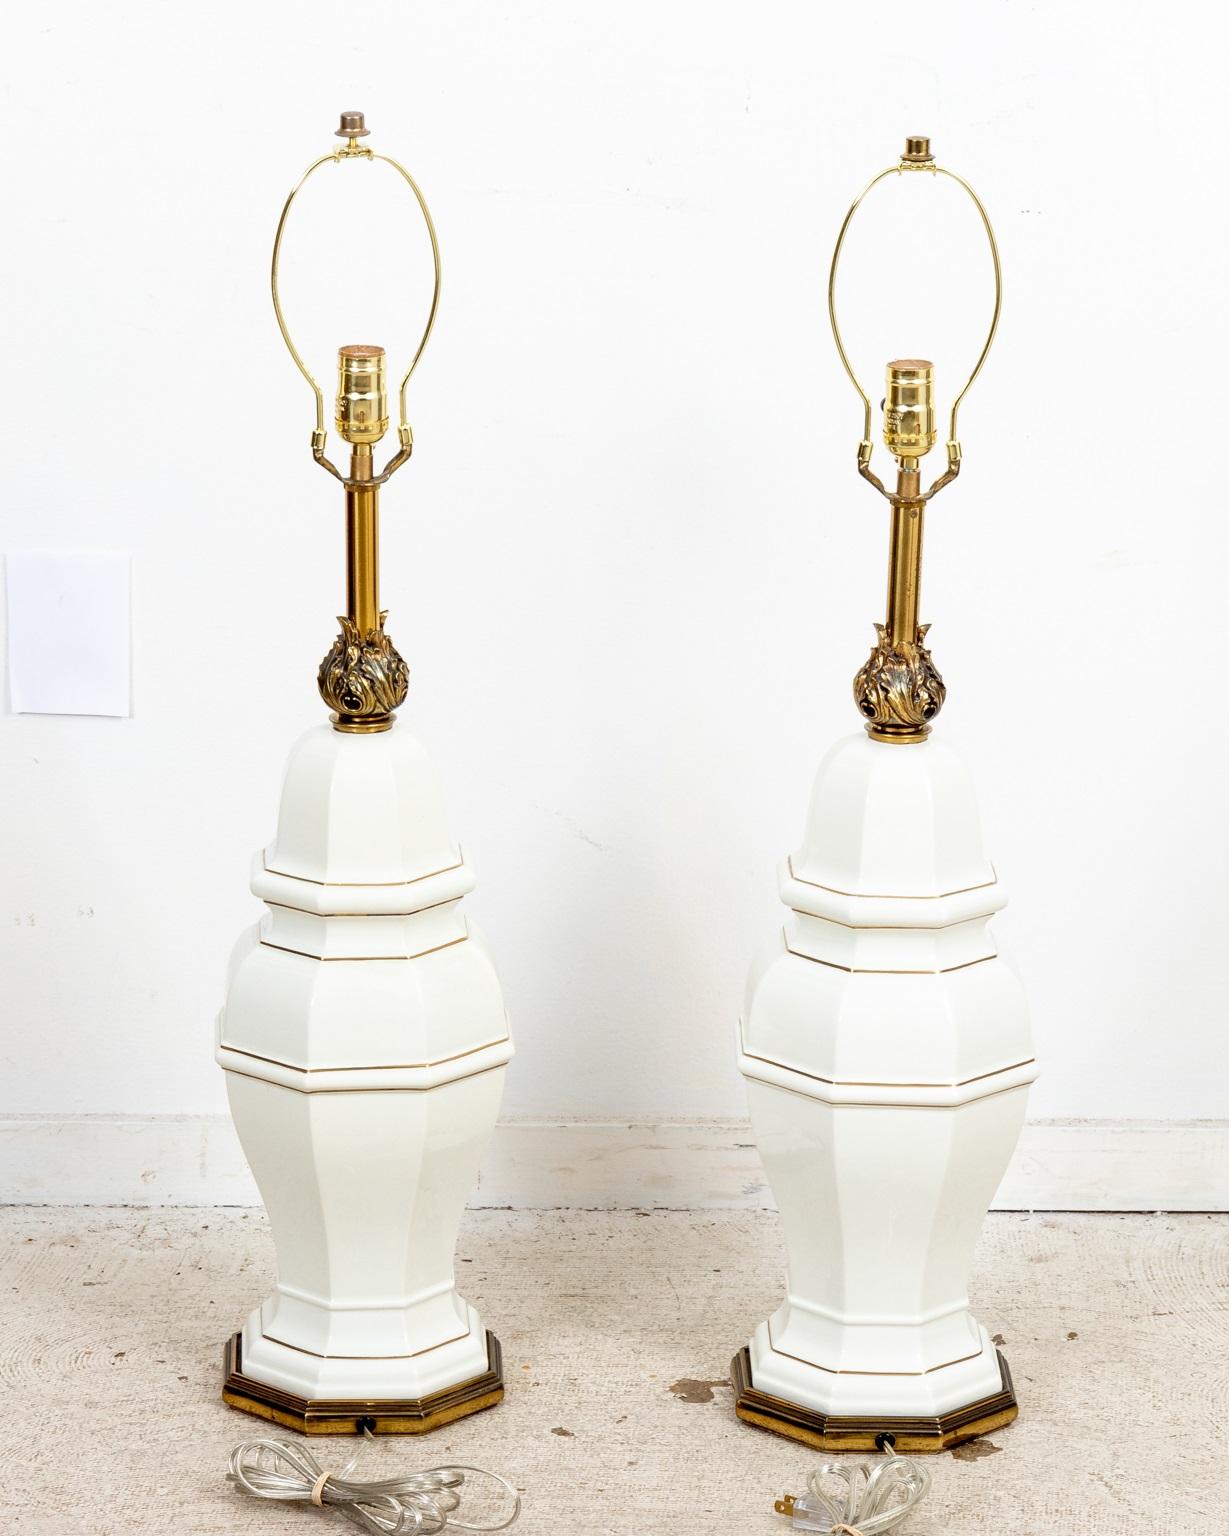 Pair of Regency style brass and white ceramic Stiffel lamps with thin gold band. Cast flame detail. In good working condition. Please note of wear consistent with age. Rewired. Shades not included.